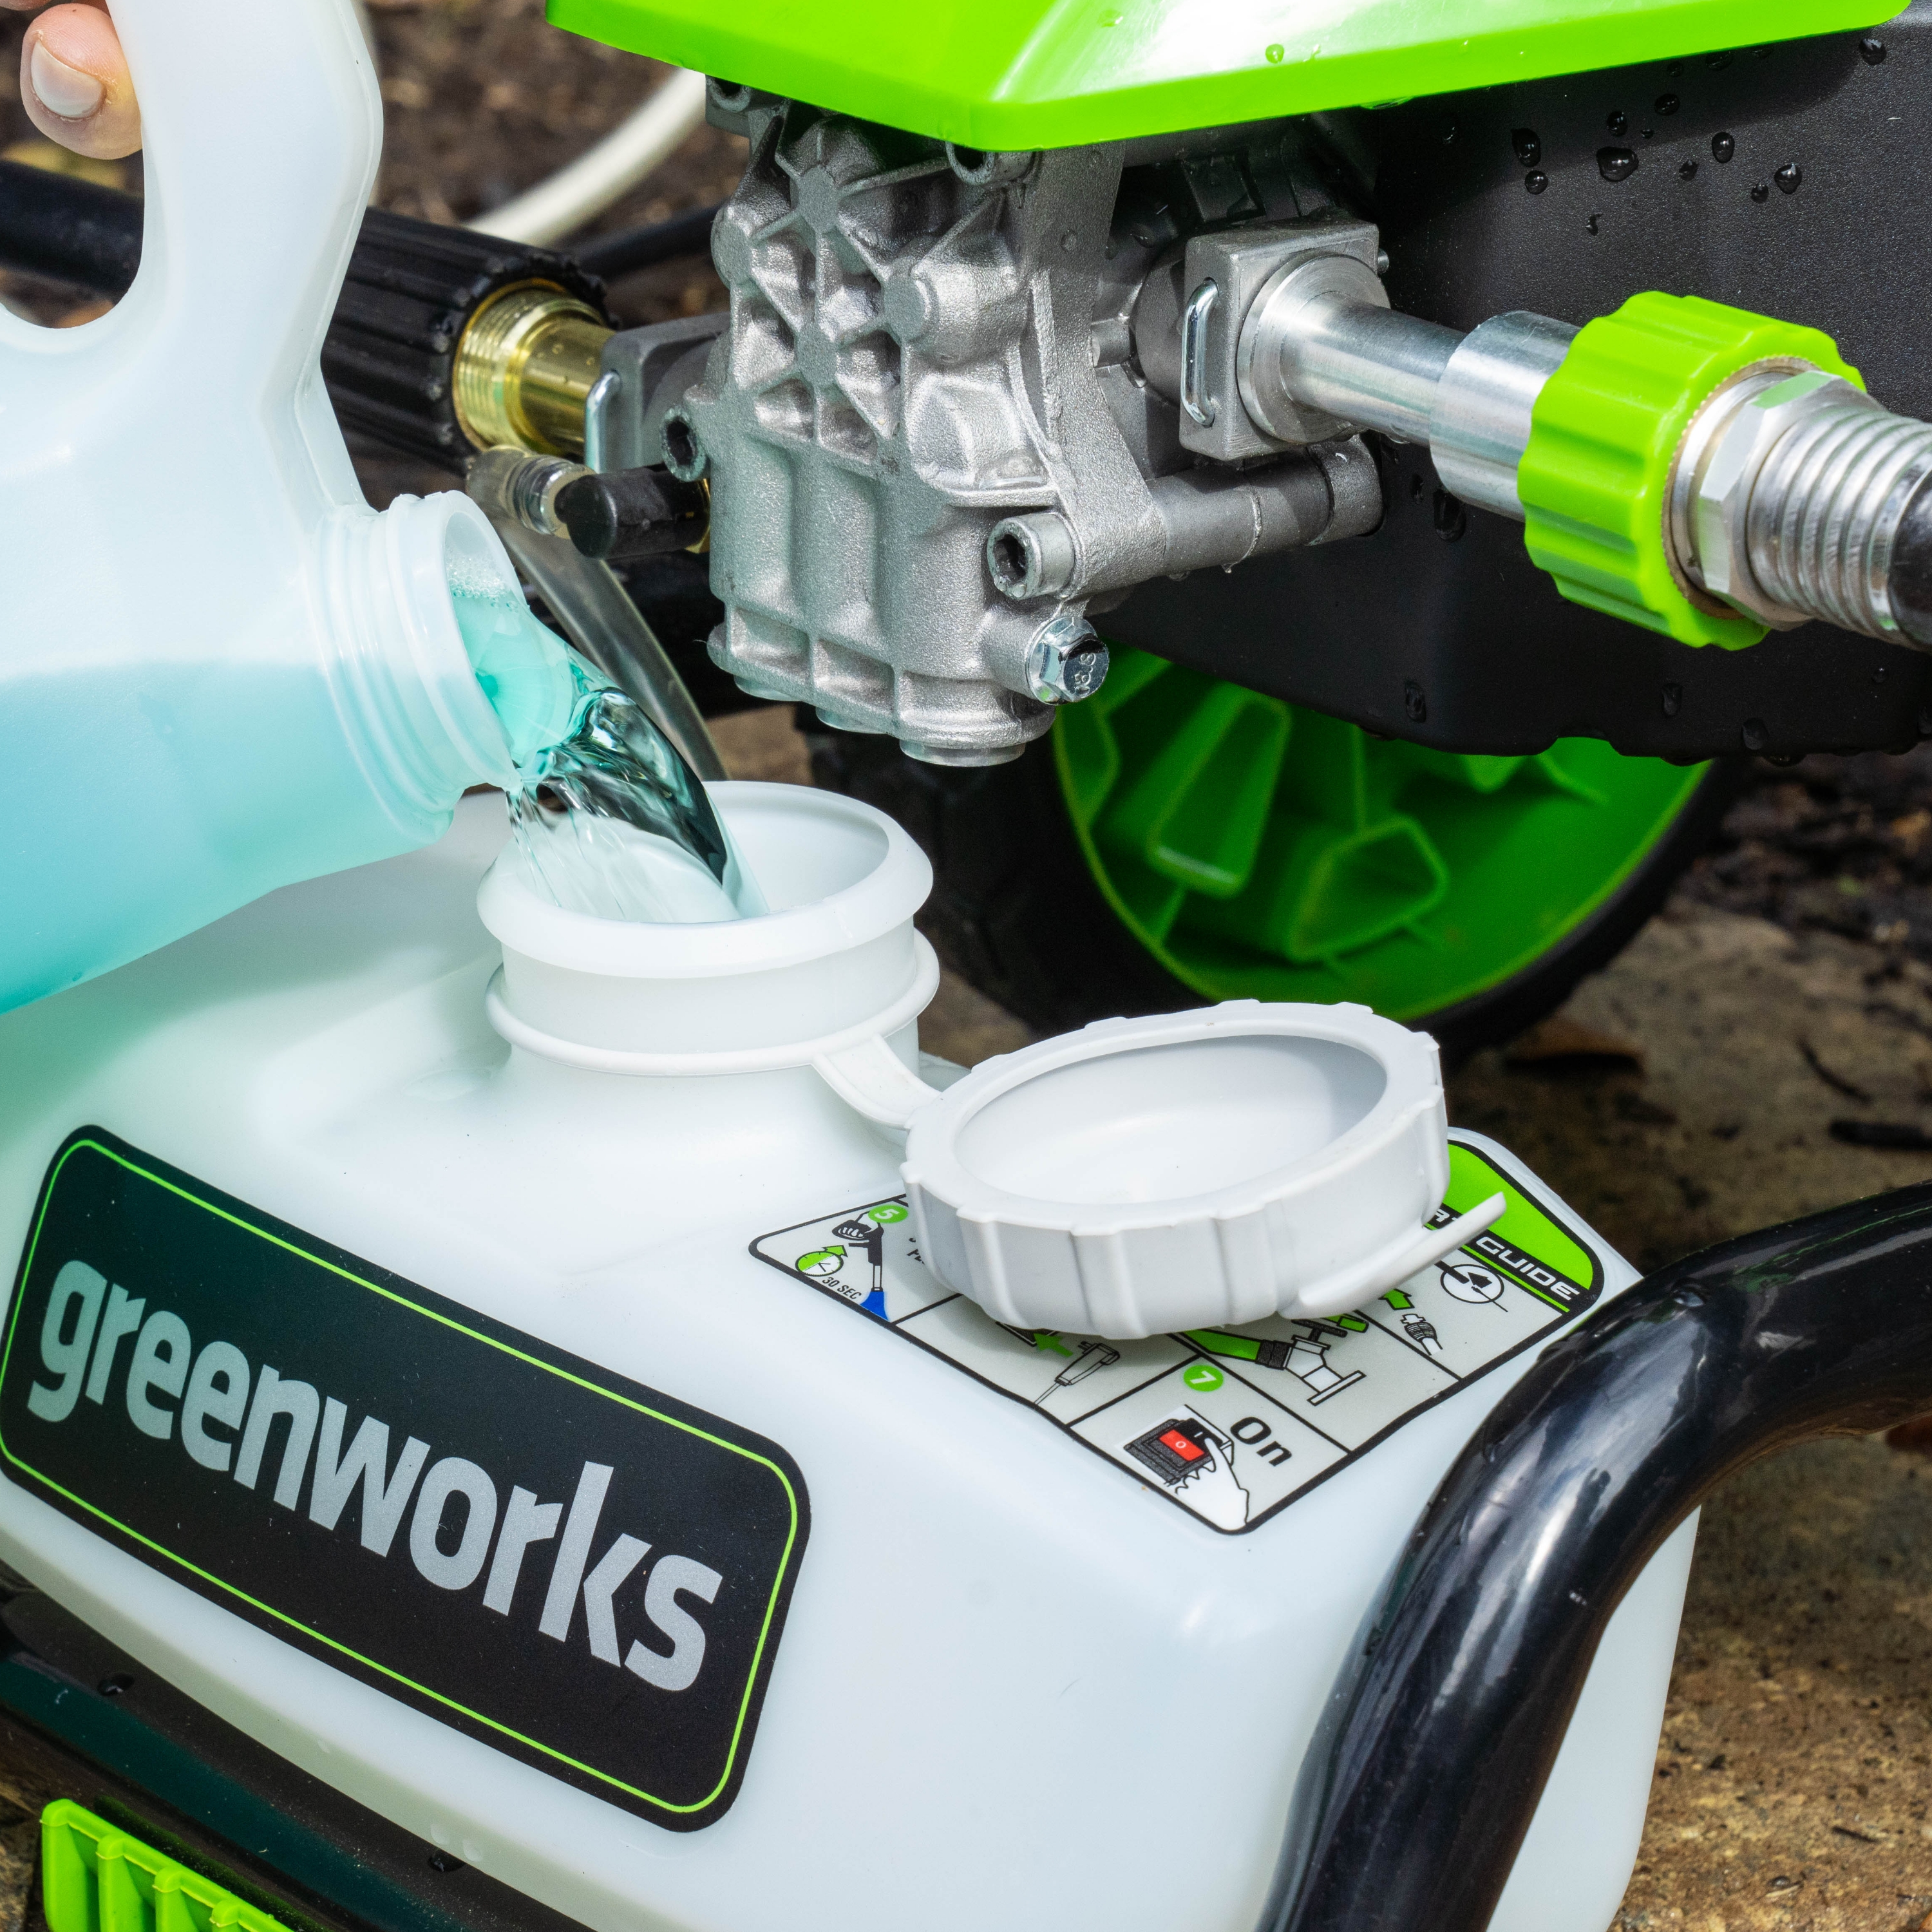 Greenworks Pro Electric Pressure Washer up to 3000 PSI at 2.0 GPM Green  5113902/GPW3001 - Best Buy